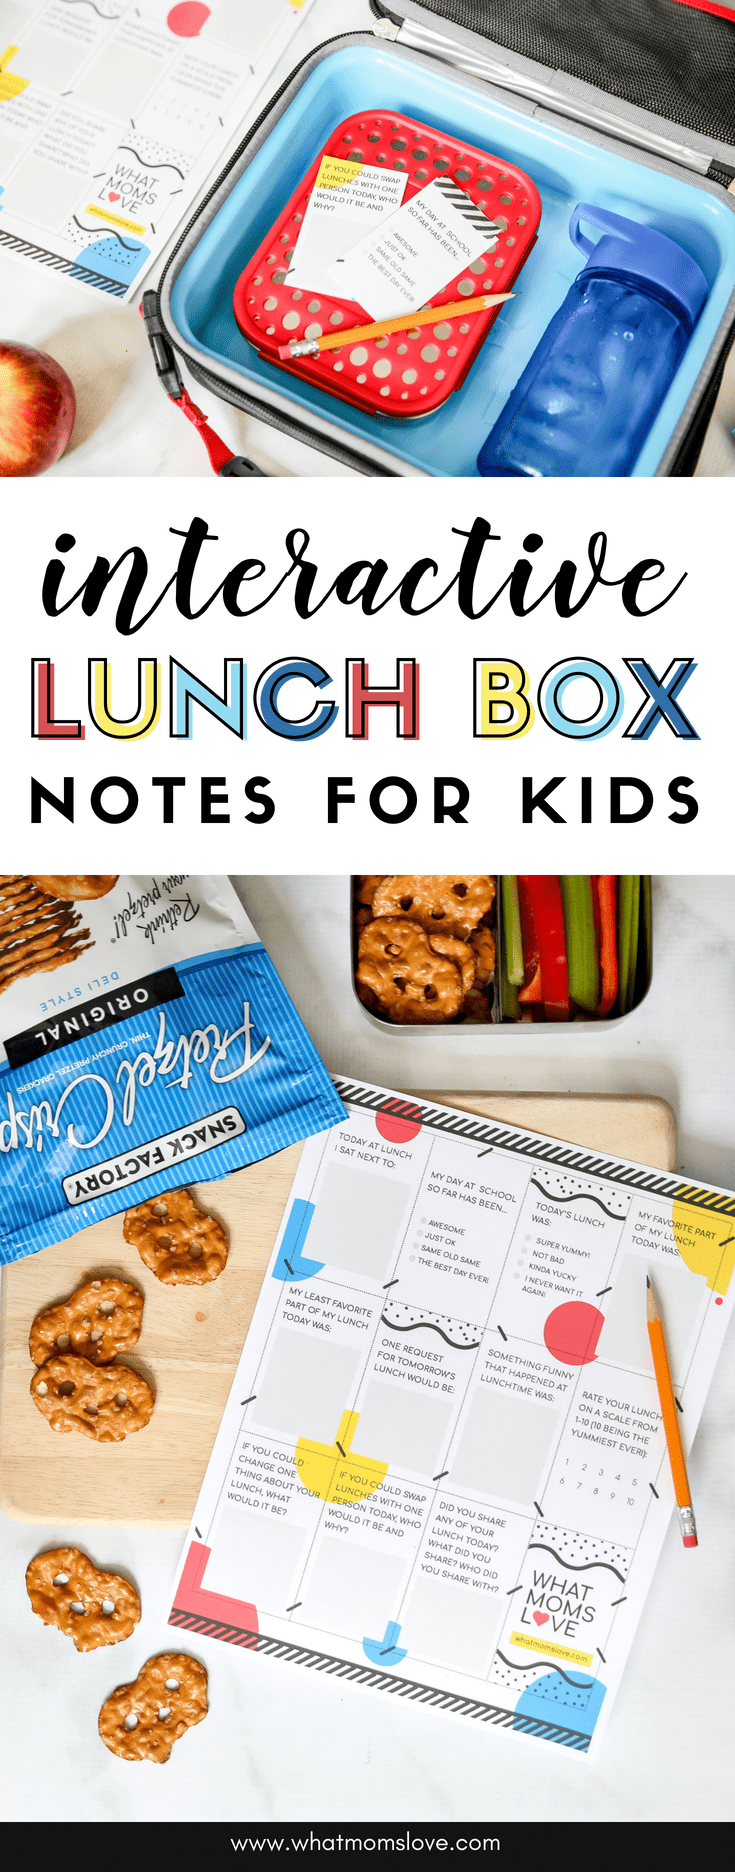 Lunch box notes for kids | Funny jokes and encouragement for girls and boys, kindergarten to teens | Many are free lunch note printables!